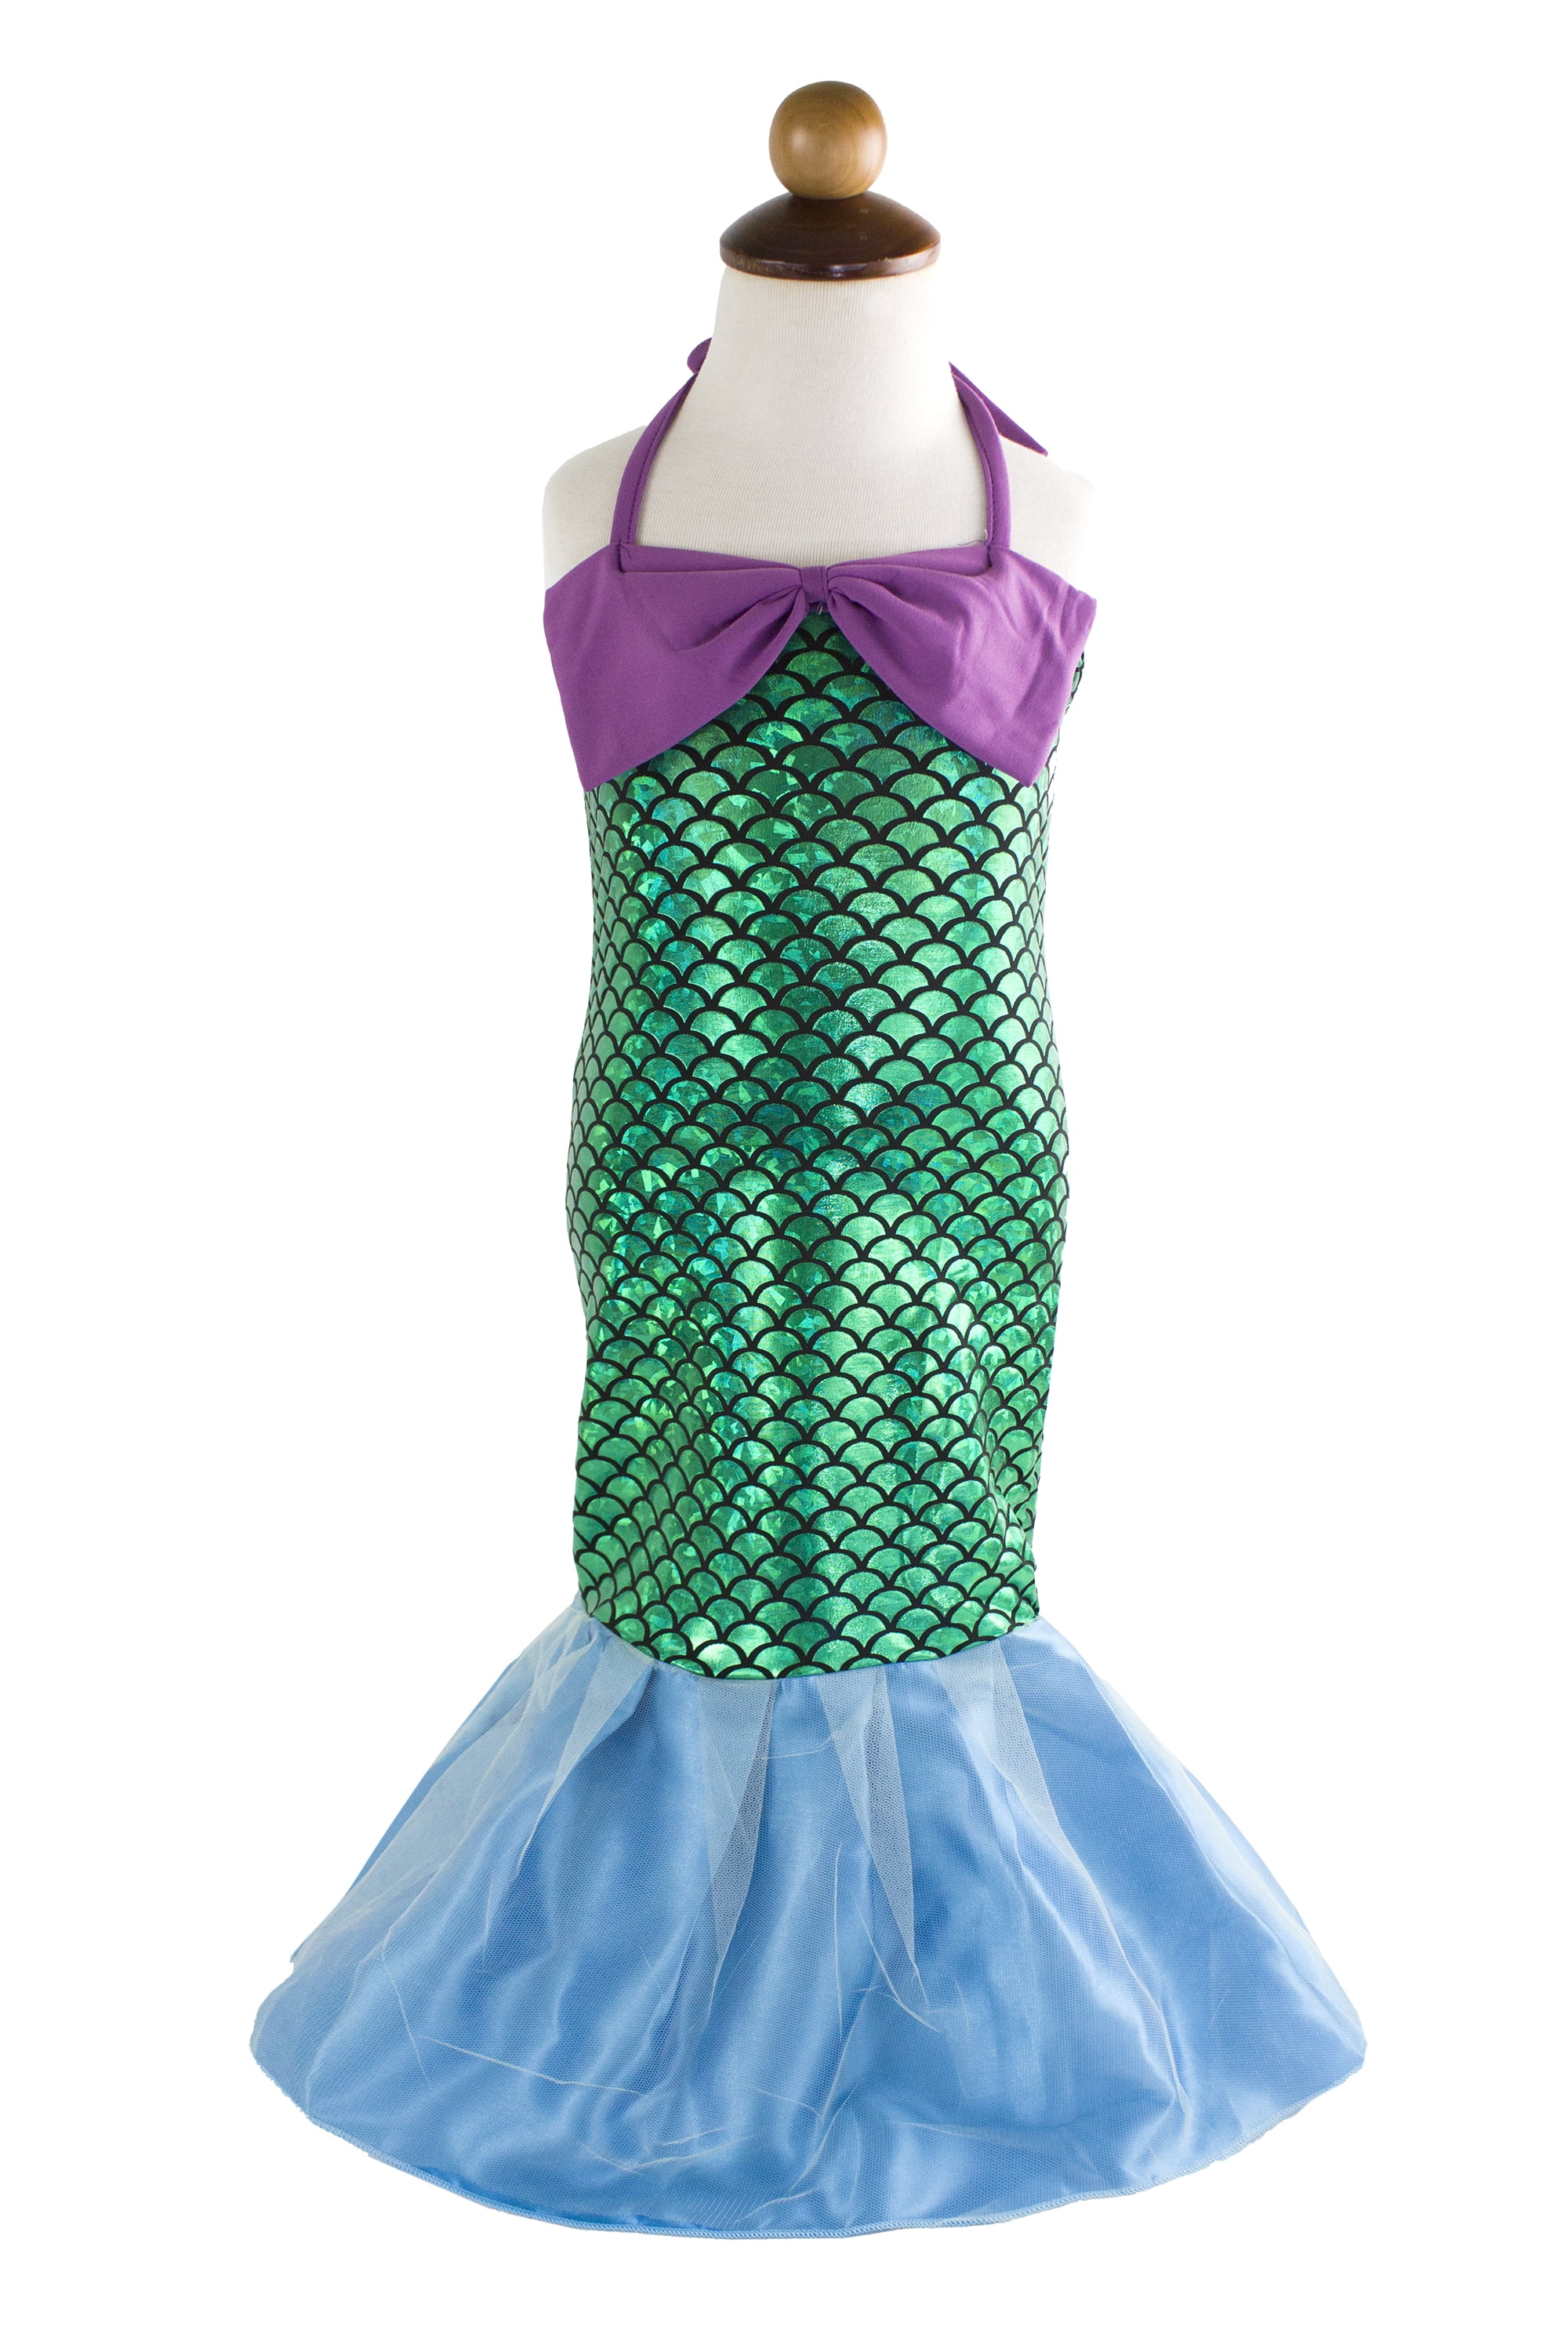 Little Girls Mermaid Costume Princess Dress Up Birthday Party Fancy Outfit Halloween Kids Dresses 1-10 Years with Accessories